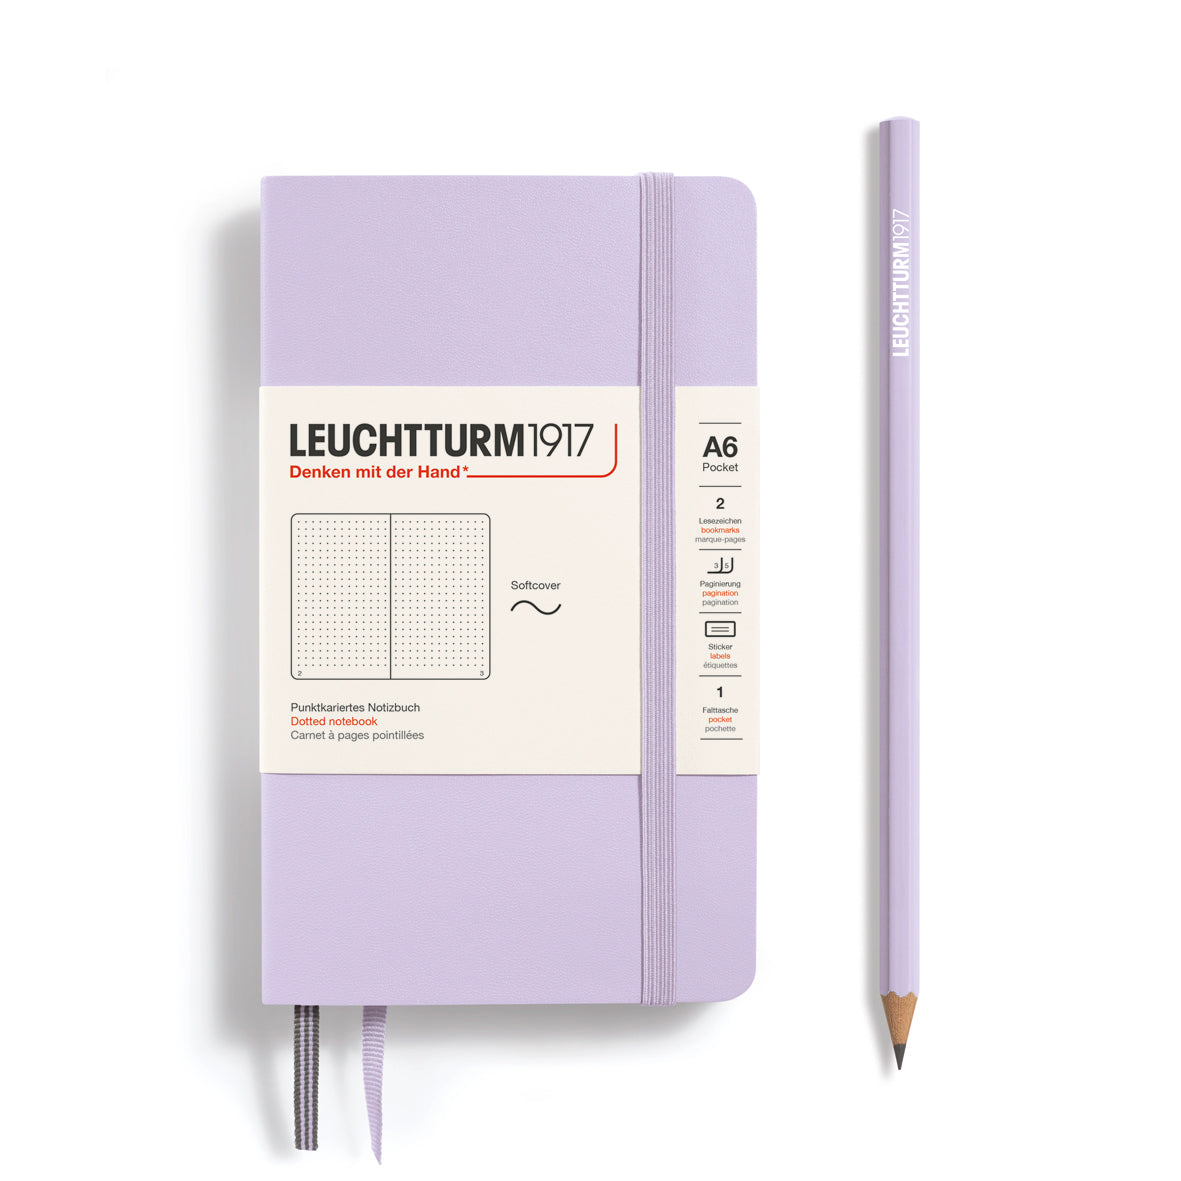 LEUCHTTURM1917 Notebook A6 Pocket Softcover in lilac and dotted inside at Penny Black